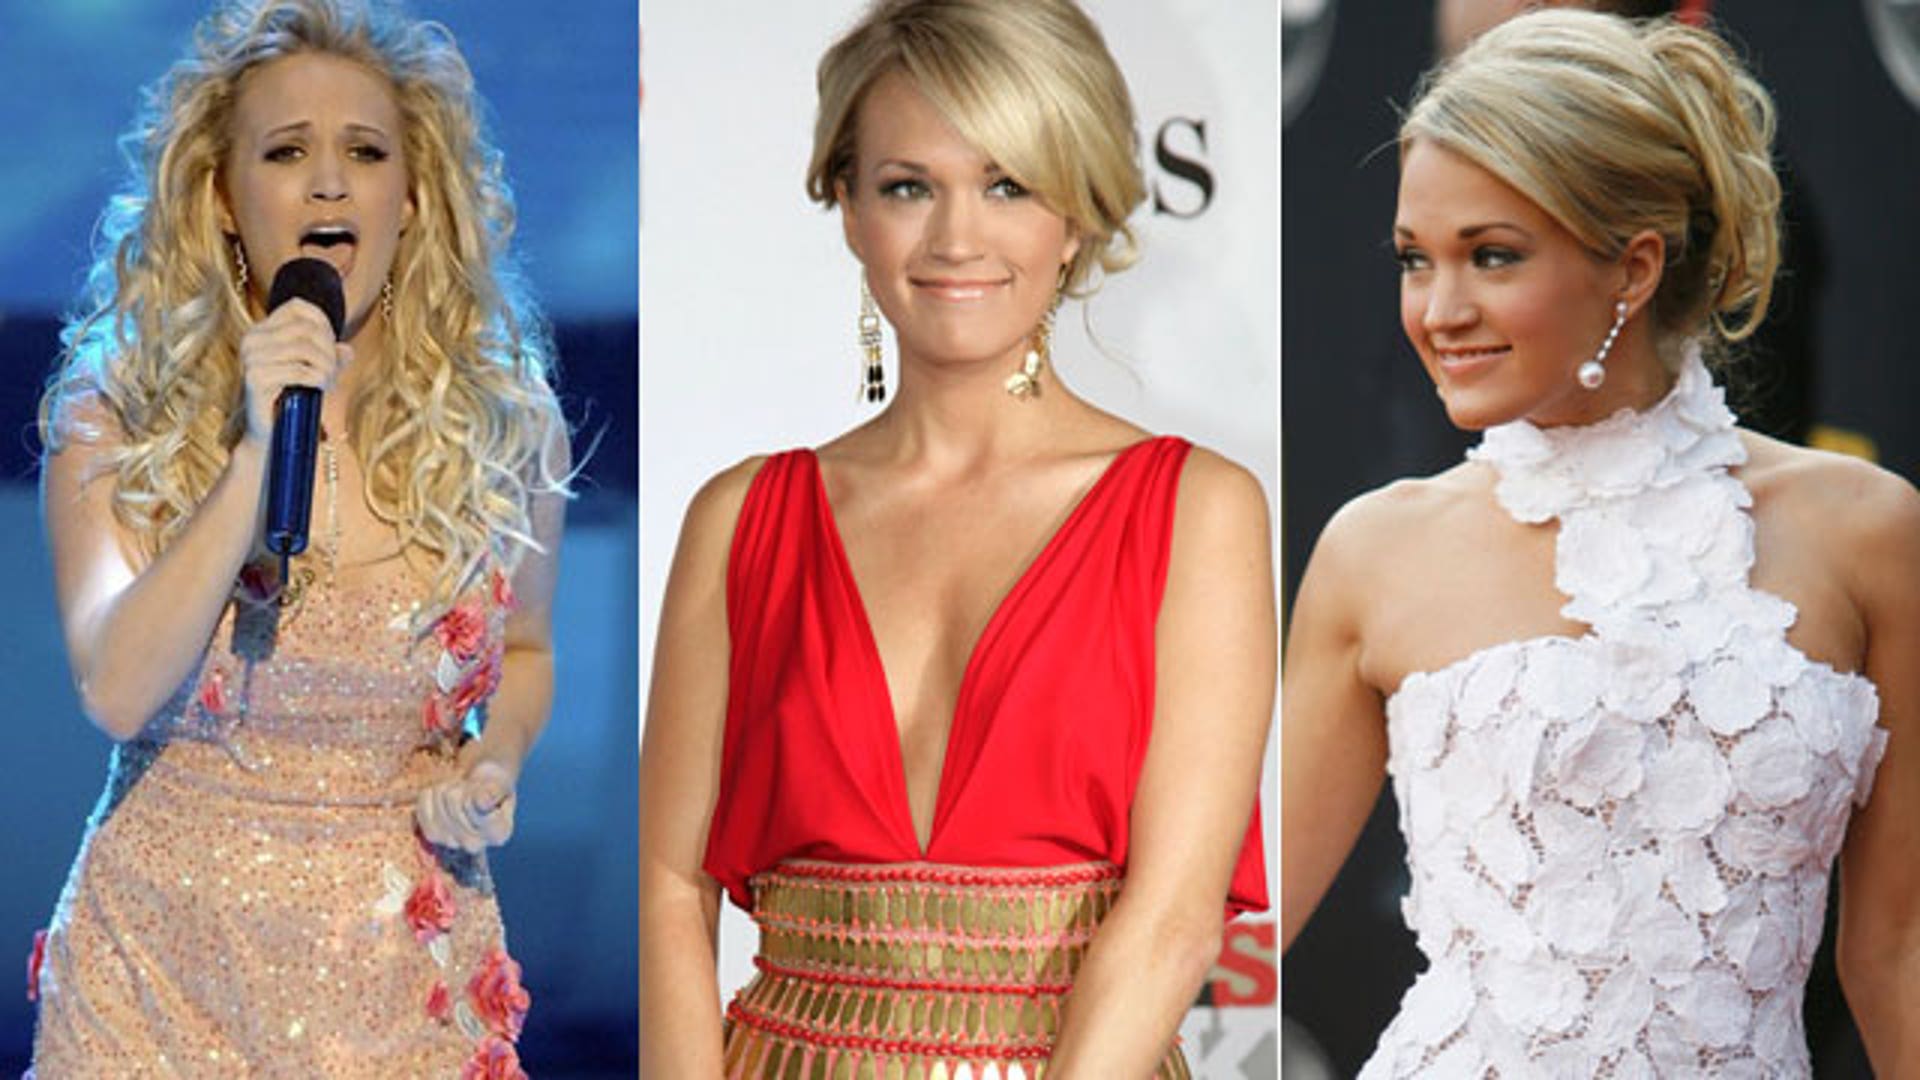 See Carrie Underwood's CMA Awards Style Evolution Through the Years